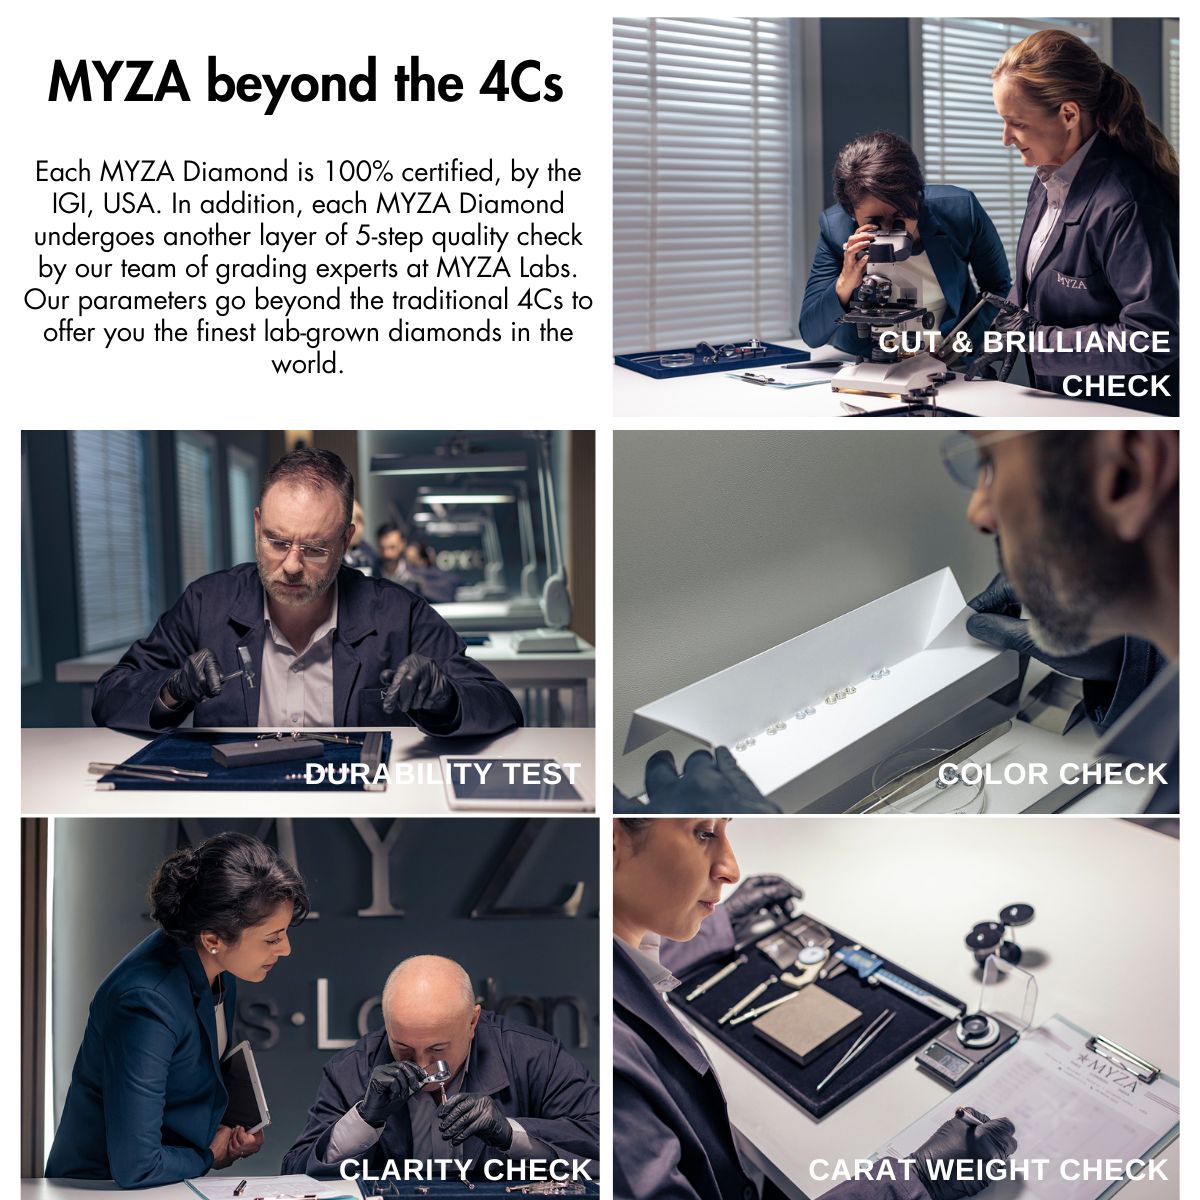 MYZA Beyond 4Cs: 5-Step Quality Check for Cut, Brilliance, Durability, Color, Clarity, Carat Weight - Ensuring Top-Notch Diamond Standards. Iconic diamond ring inspected for brilliance, clarity, and more in MYZA's meticulous quality assurance process.